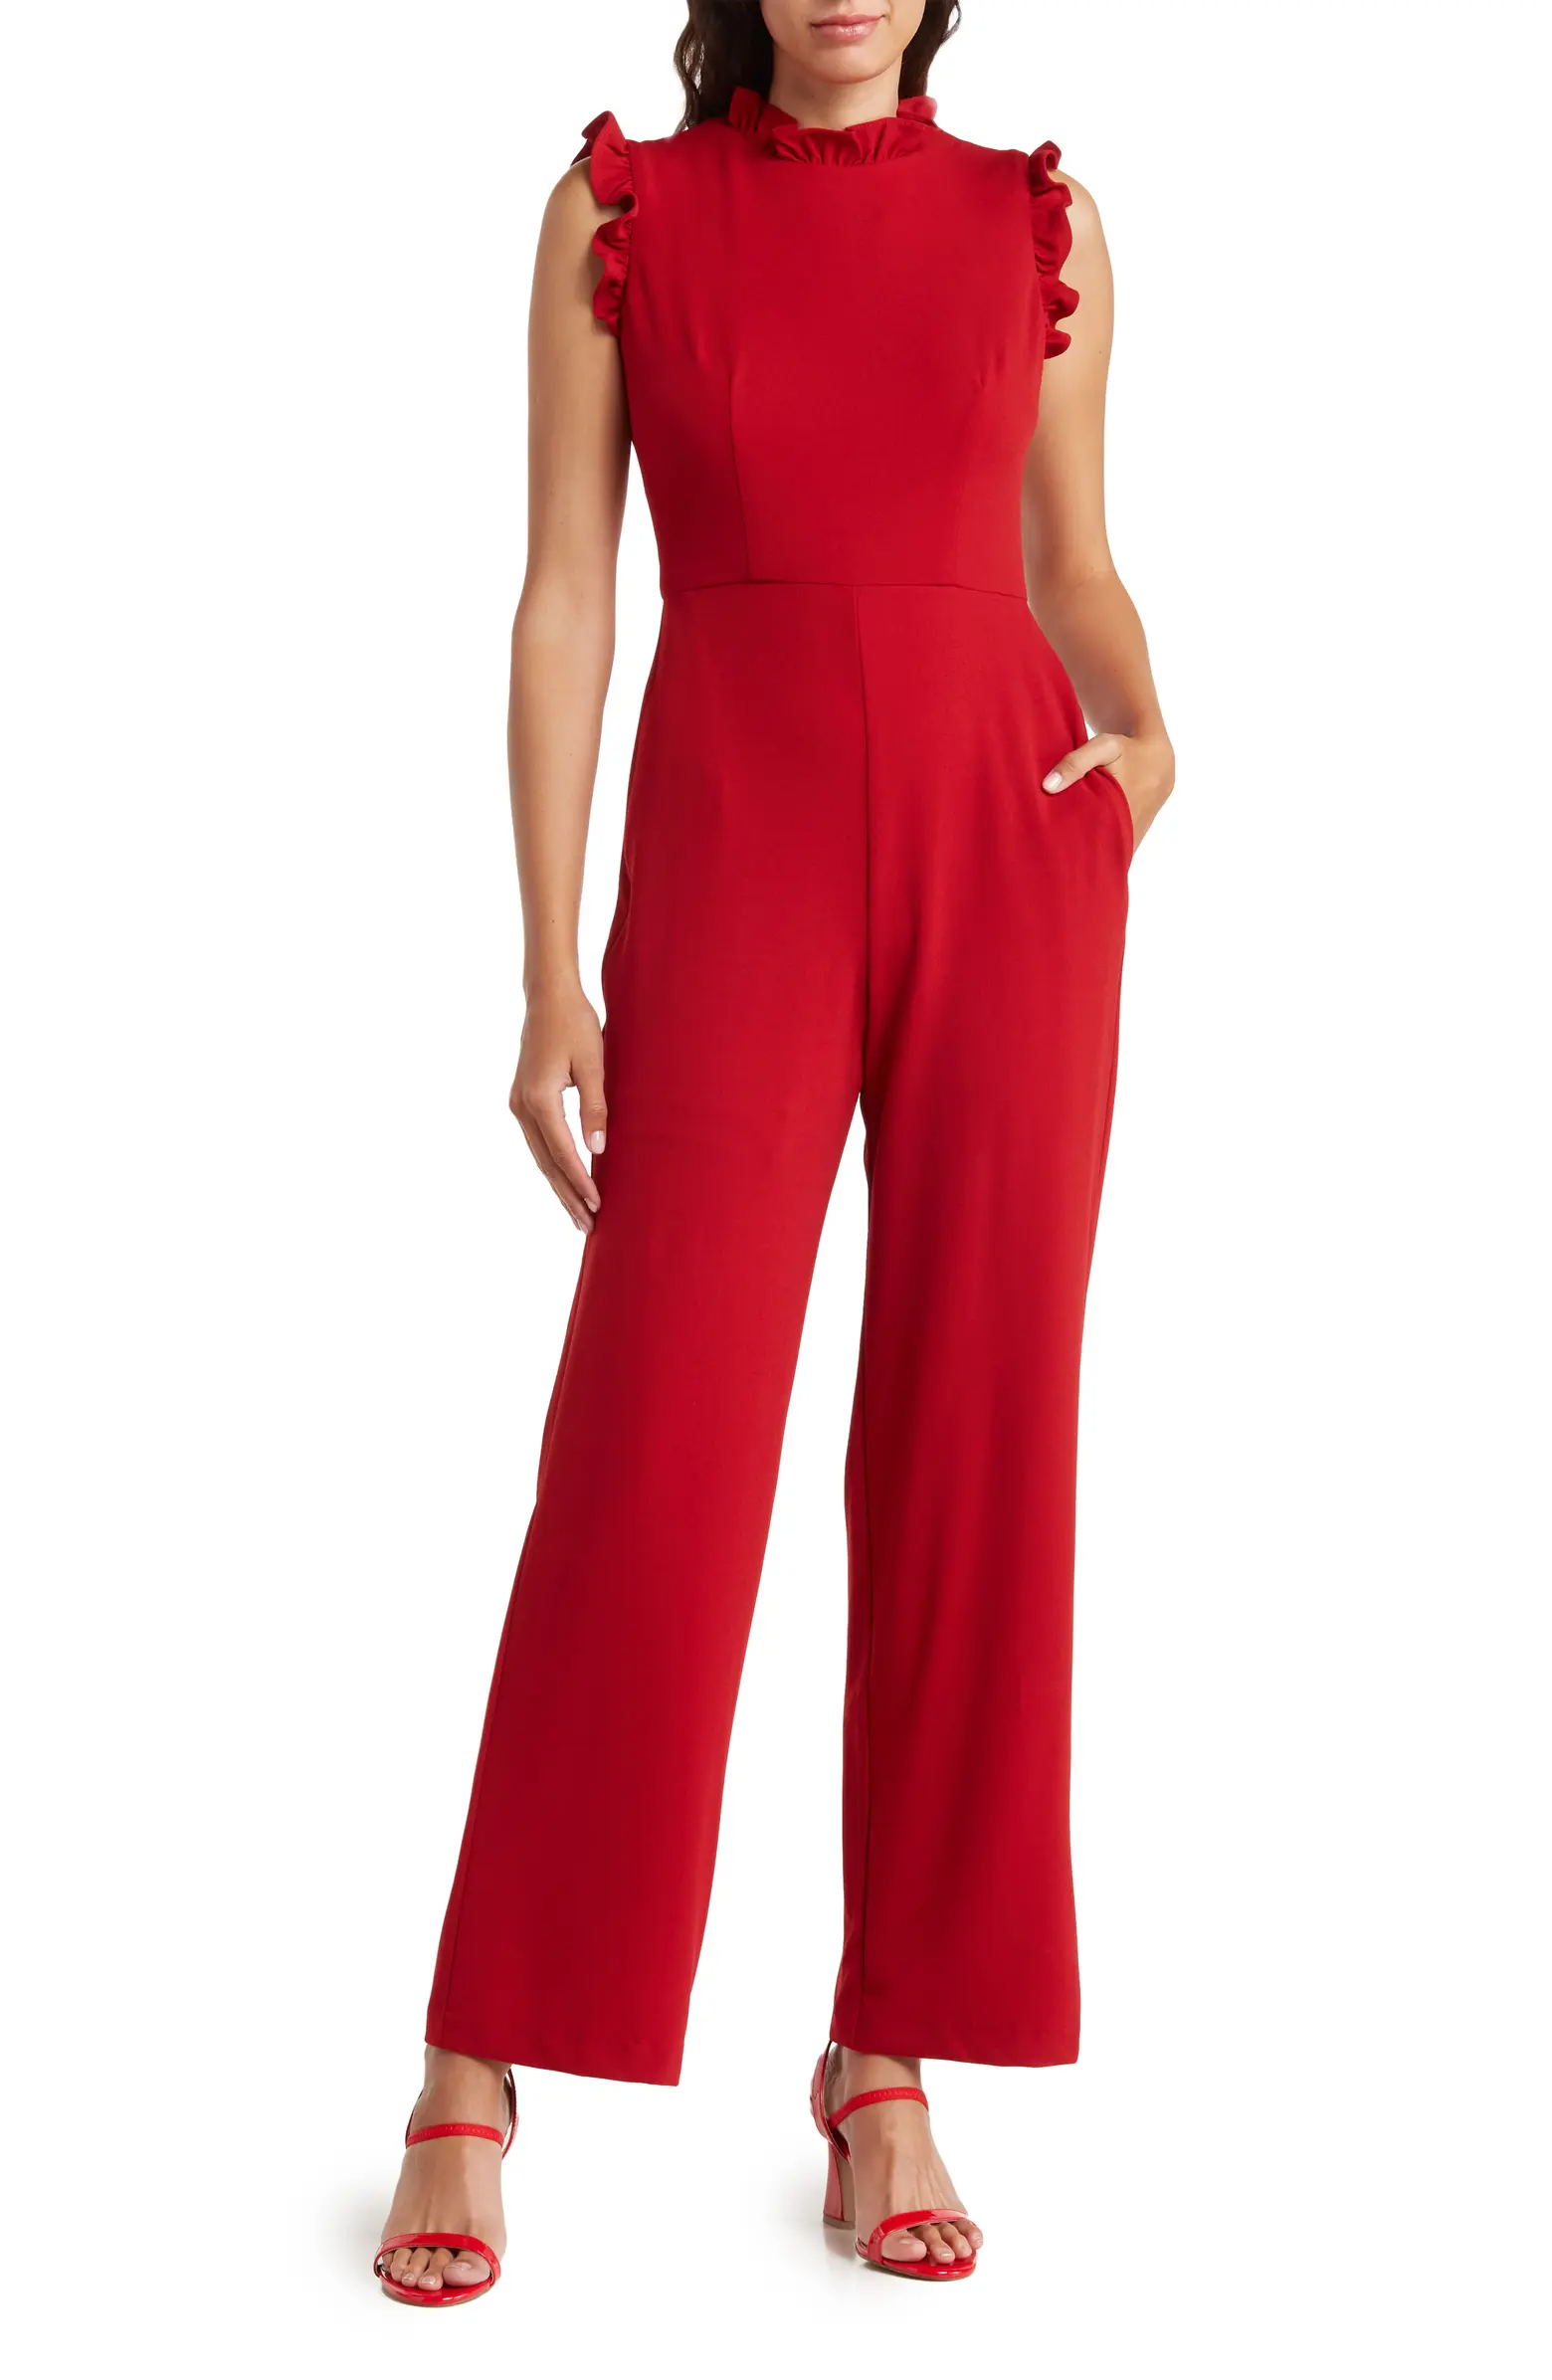 The Jumpsuit Guide for Petite Women - Petite Dressing